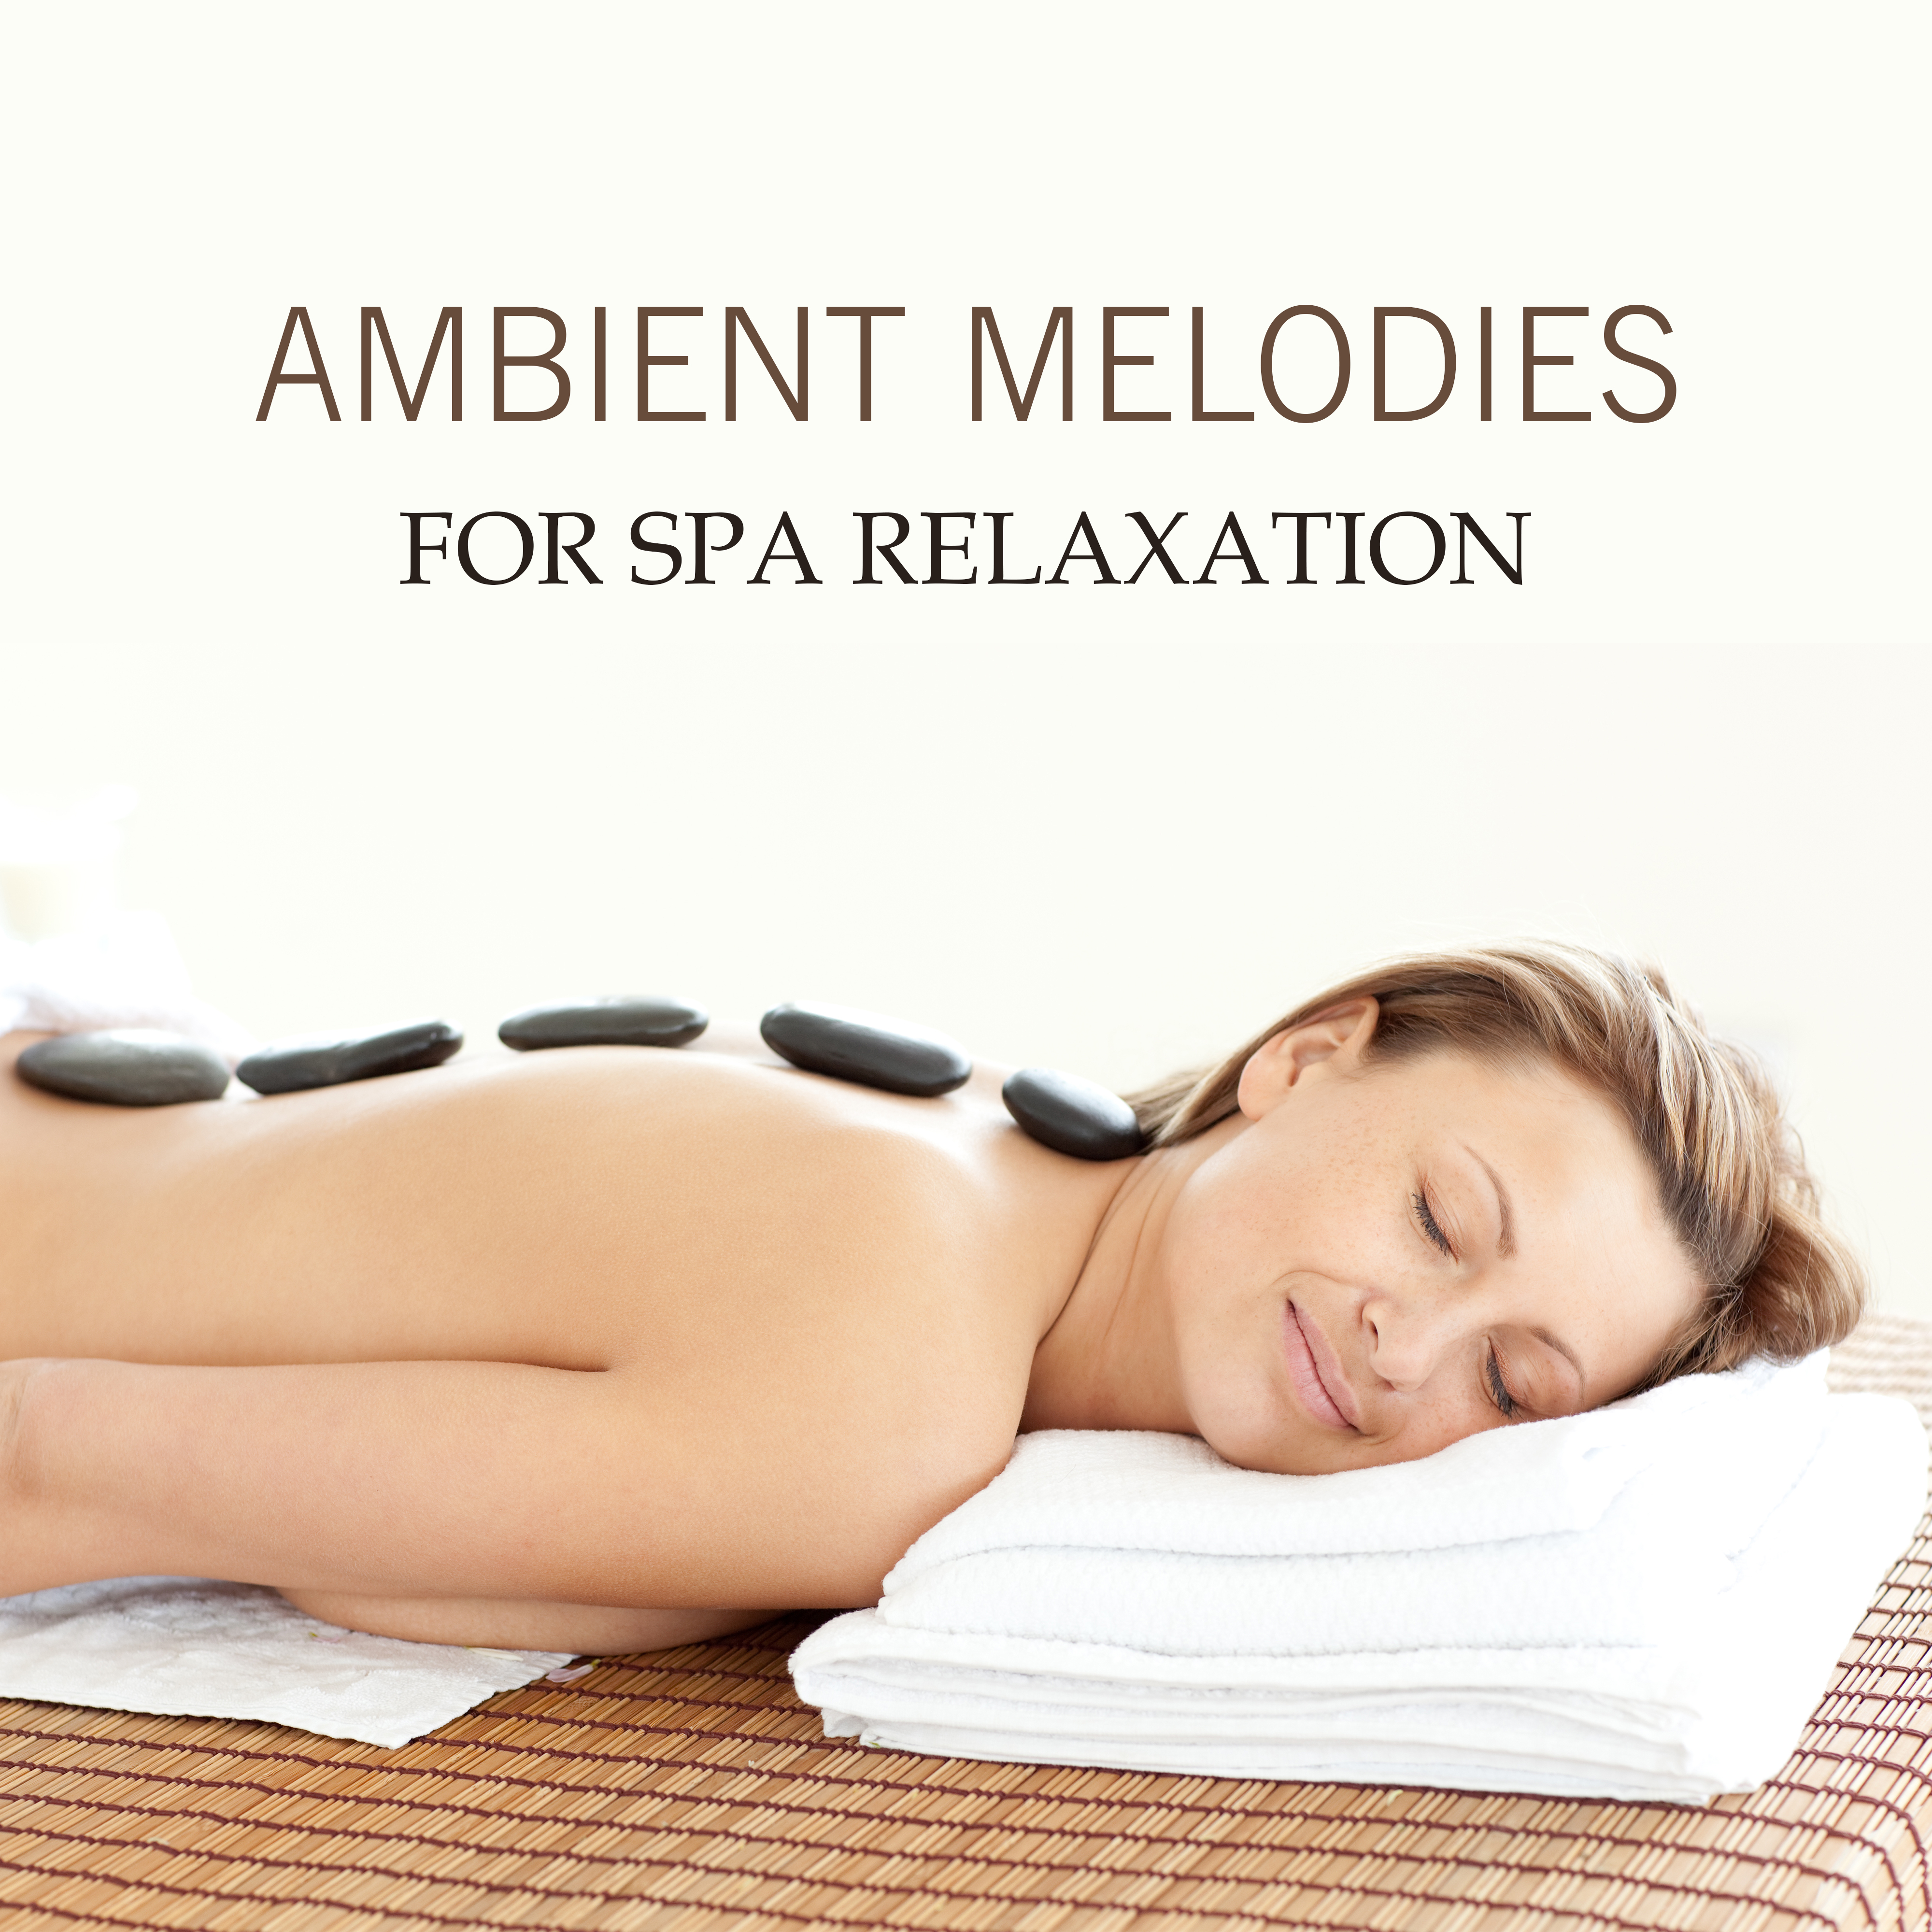 Ambient Melodies for Spa Relaxation